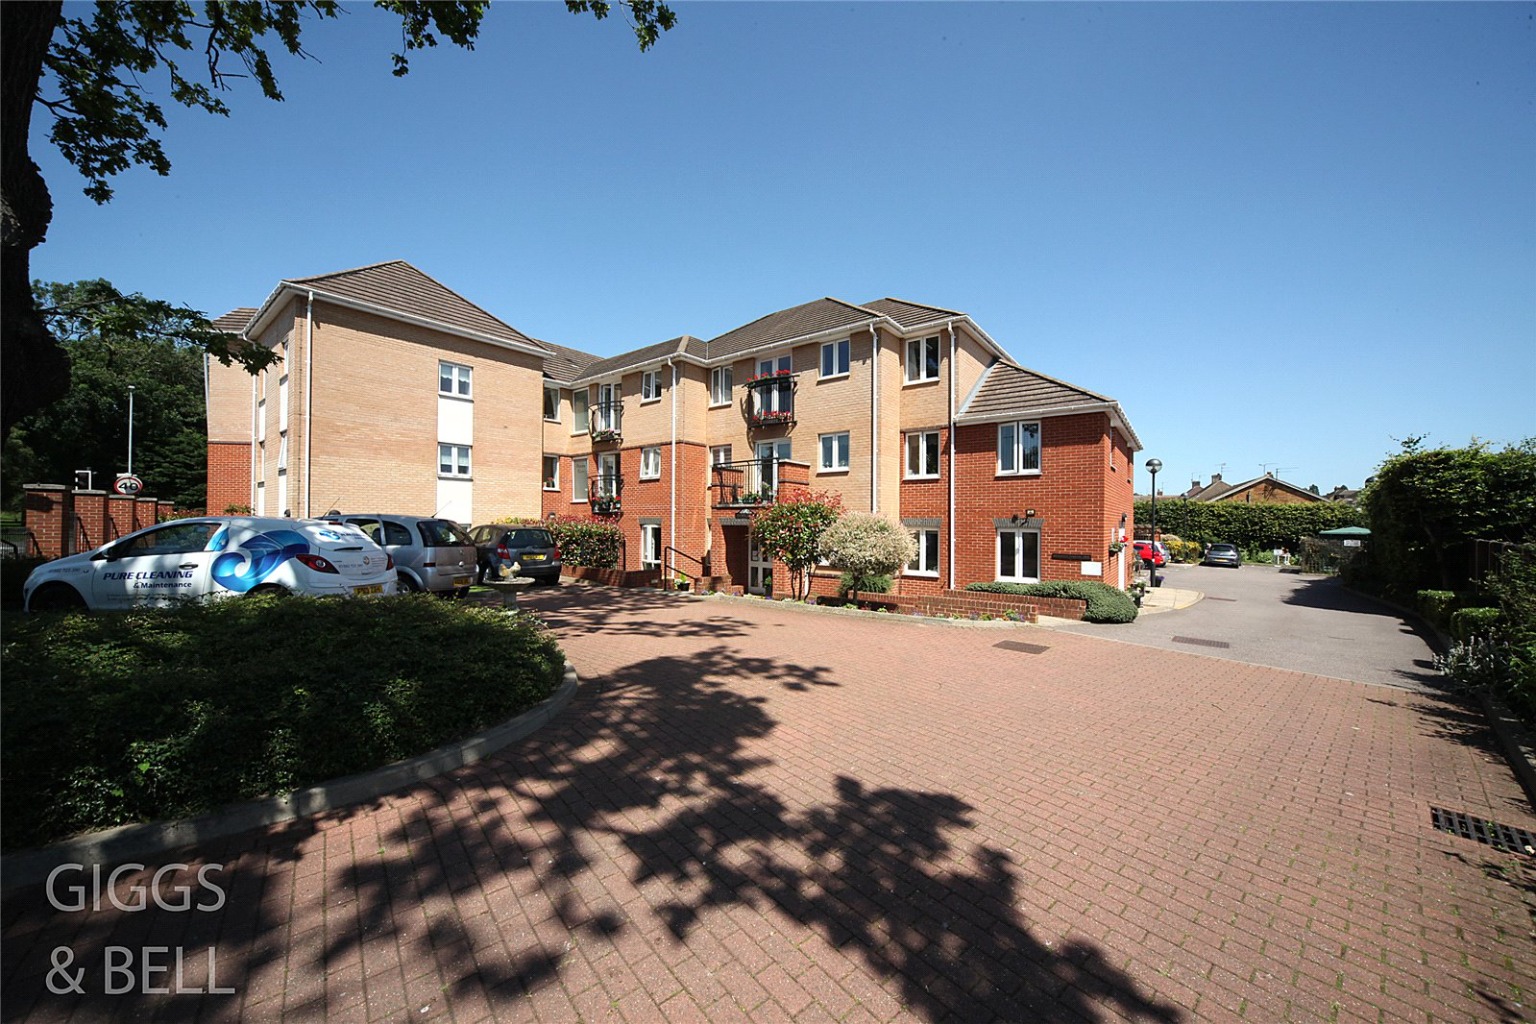 1 bed flat for sale in Cannon Lane, Luton, LU2 